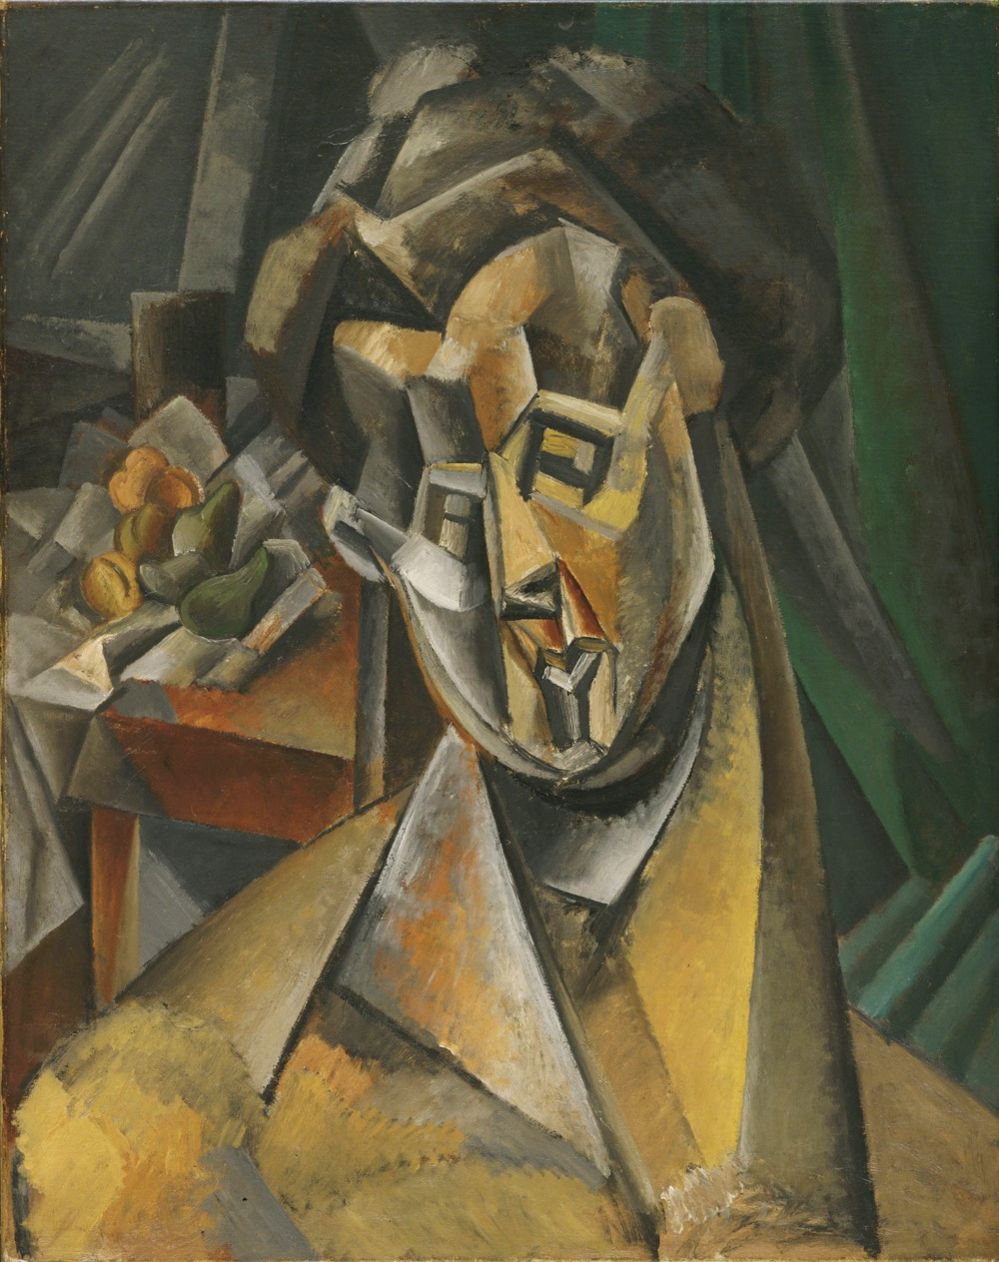 Woman with Pears, 1909, a painting by Picasso